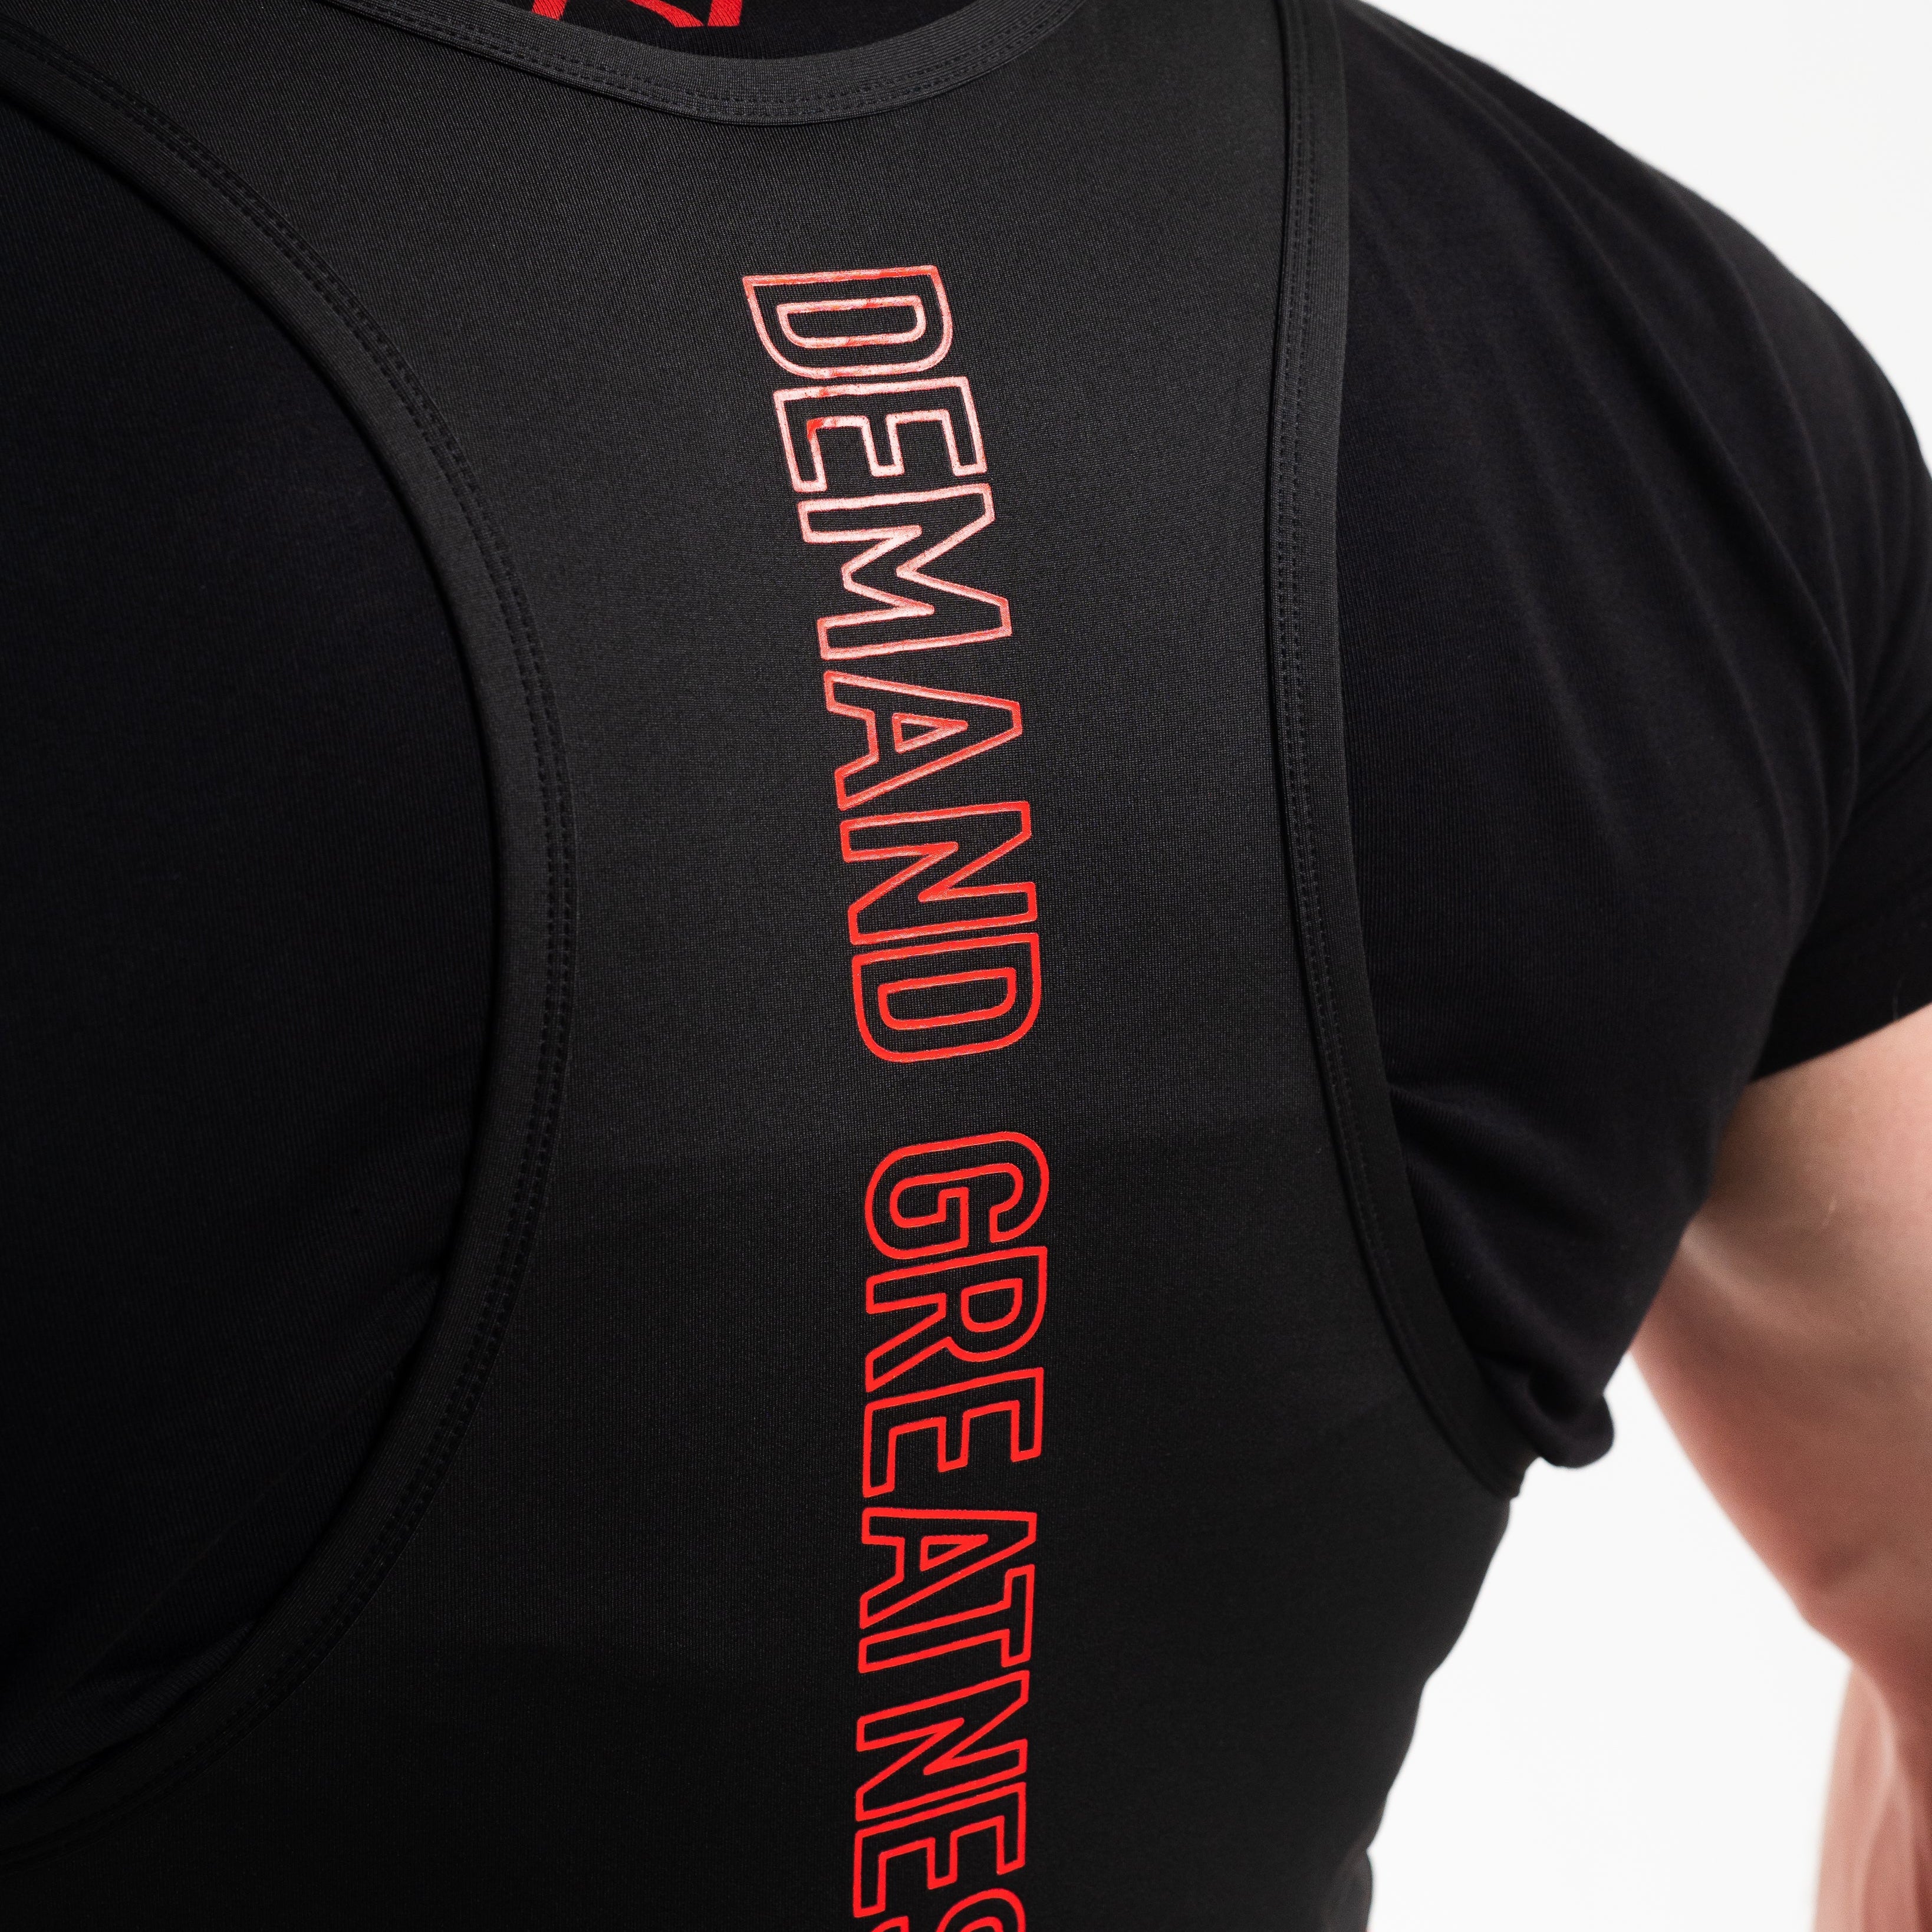 A7 IPF Approved Red Dawn Luno singlet features extra lat mobility, side panel stitching to guide the squat depth level and curved panel design for a slimming look. The Women's cut singlet features a tapered waist and additional quad room. The IPF Approved Kit includes Luno Powerlifting Singlet, A7 Meet Shirt, A7 Zebra Wrist Wraps, A7 Deadlift Socks, Hourglass Knee Sleeves (Stiff Knee Sleeves and Rigor Mortis Knee Sleeves). All A7 Powerlifting Equipment shipping to UK, Norway, Switzerland and Iceland.